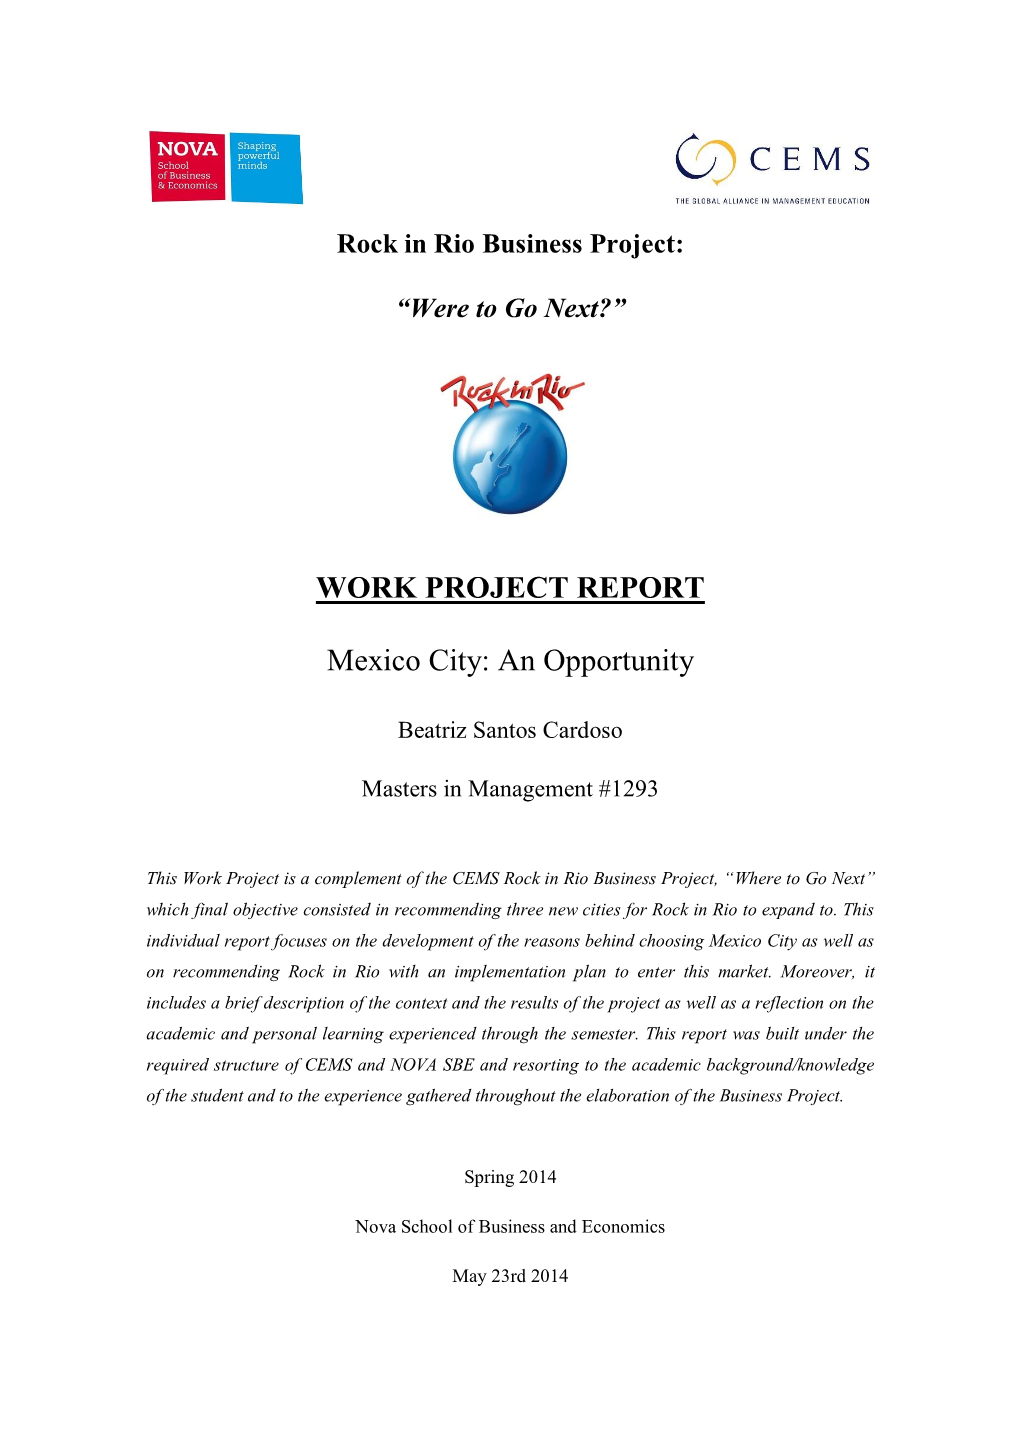 WORK PROJECT REPORT Mexico City